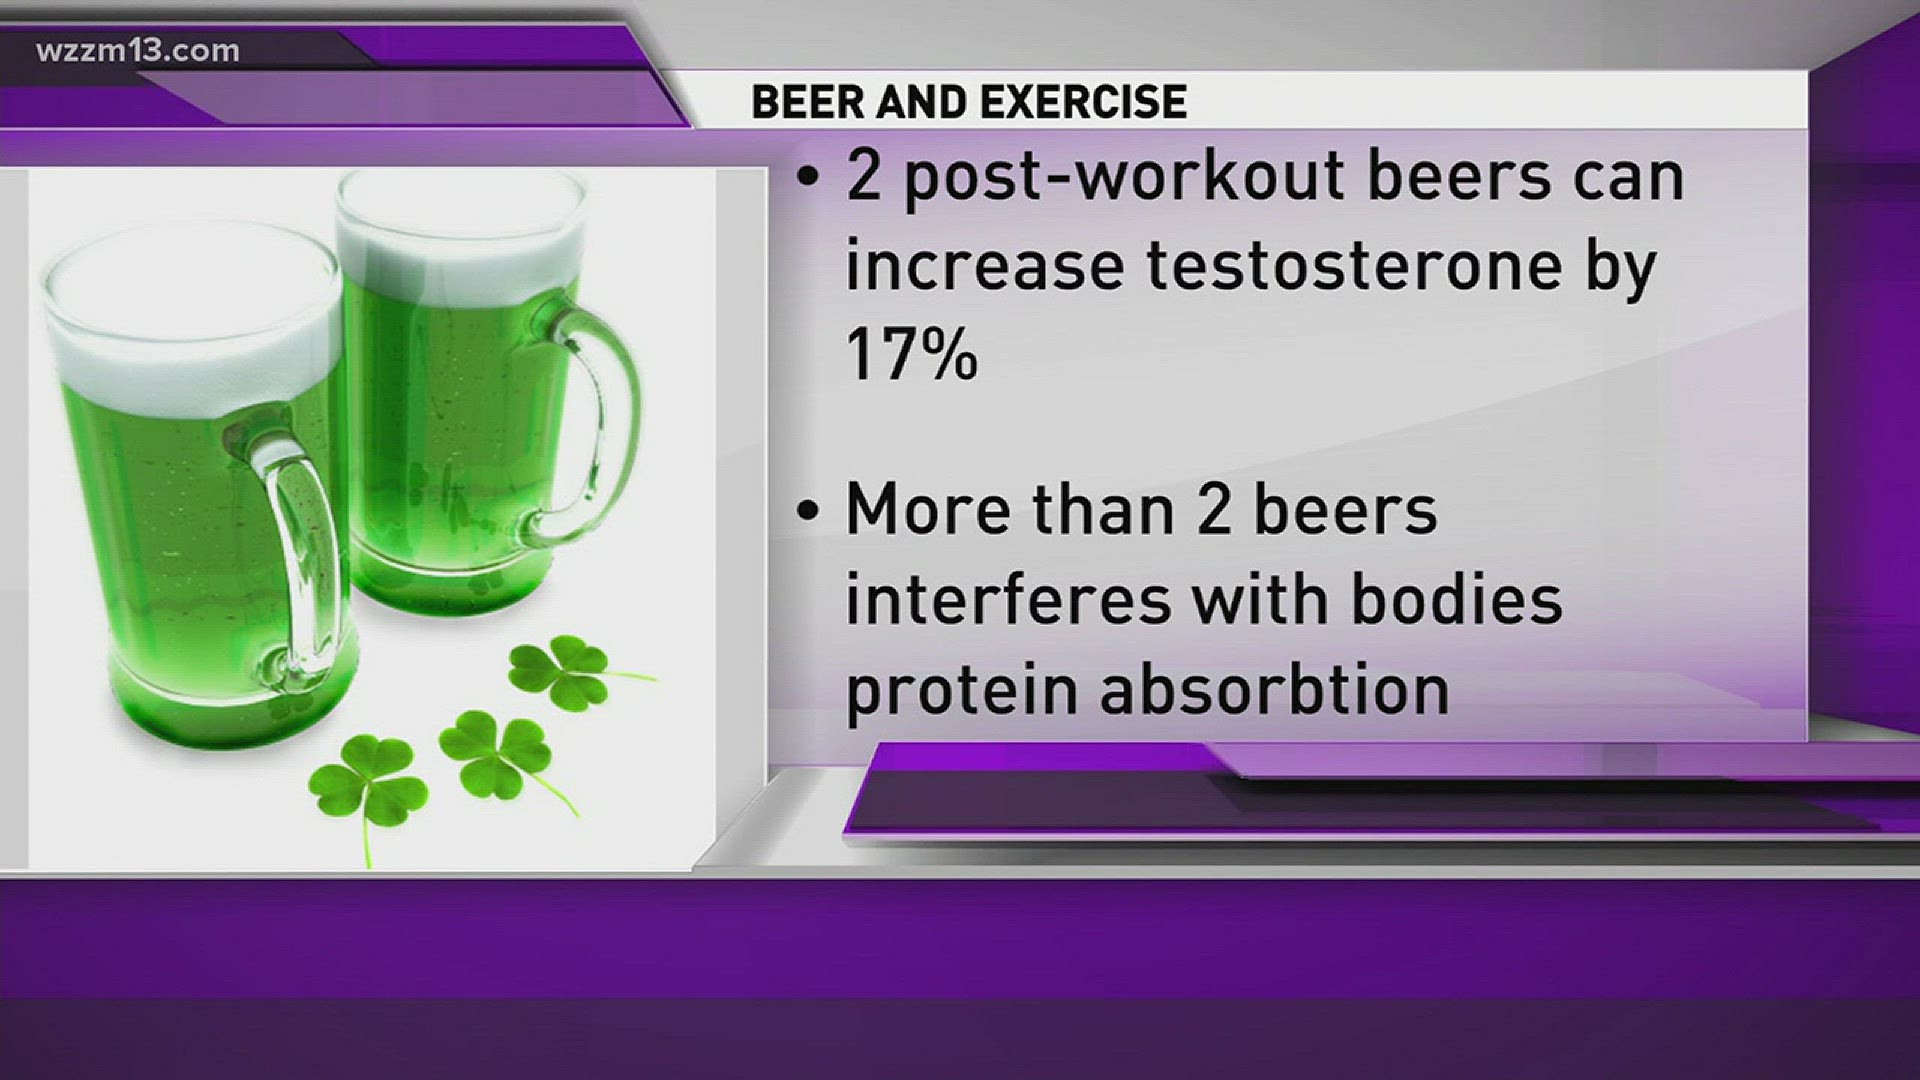 Green beer is shockingly not so good for you